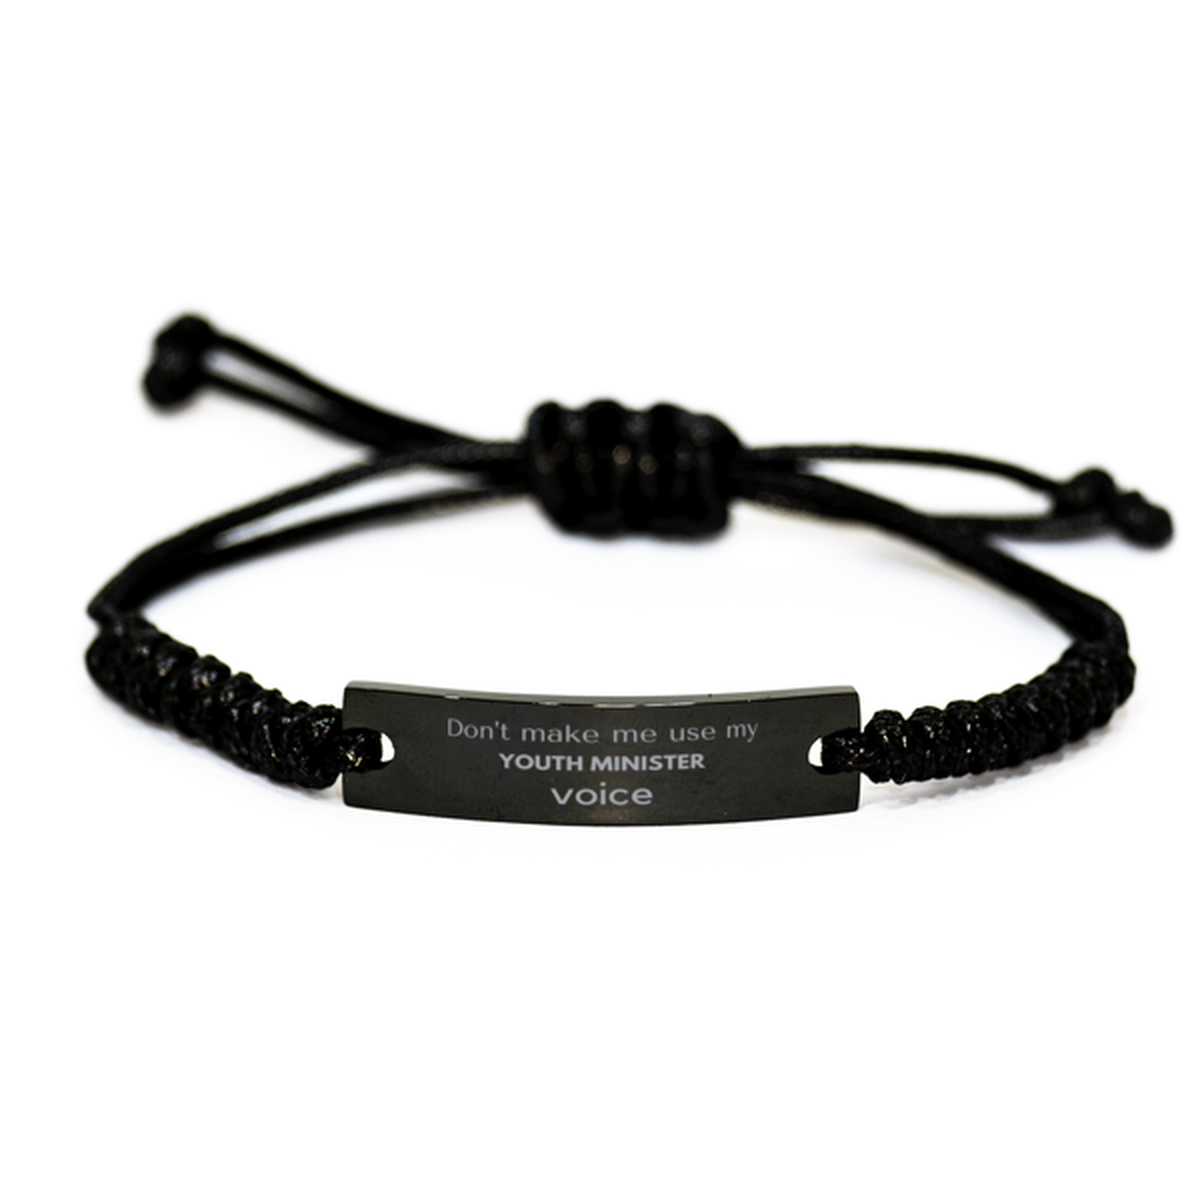 Don't make me use my Youth Minister voice, Sarcasm Youth Minister Gifts, Christmas Youth Minister Black Rope Bracelet Birthday Unique Gifts For Youth Minister Coworkers, Men, Women, Colleague, Friends